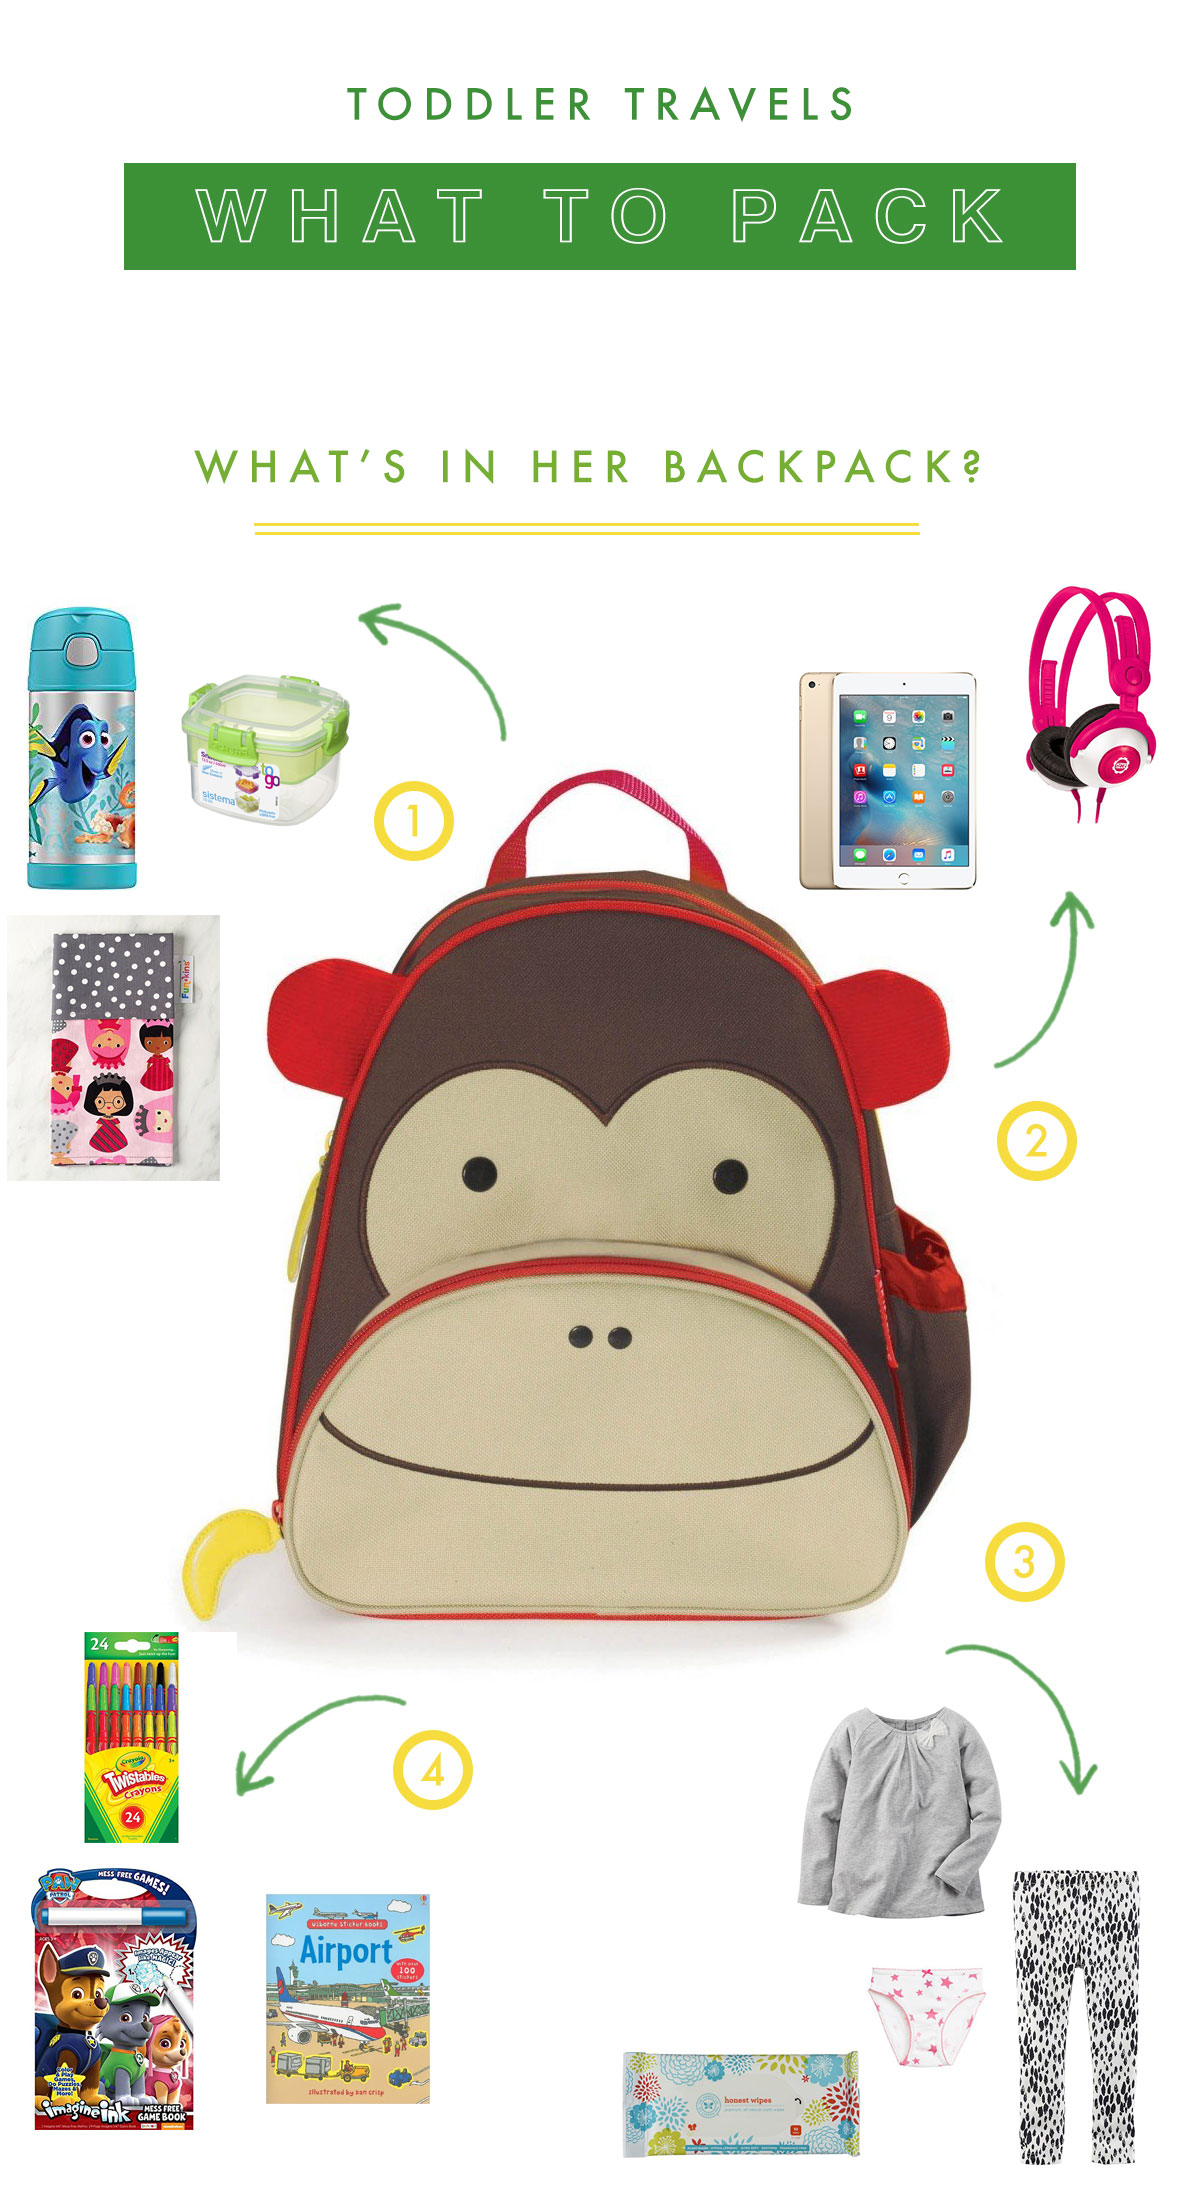 What-to-Pack-Toddler-Travel-Backpack